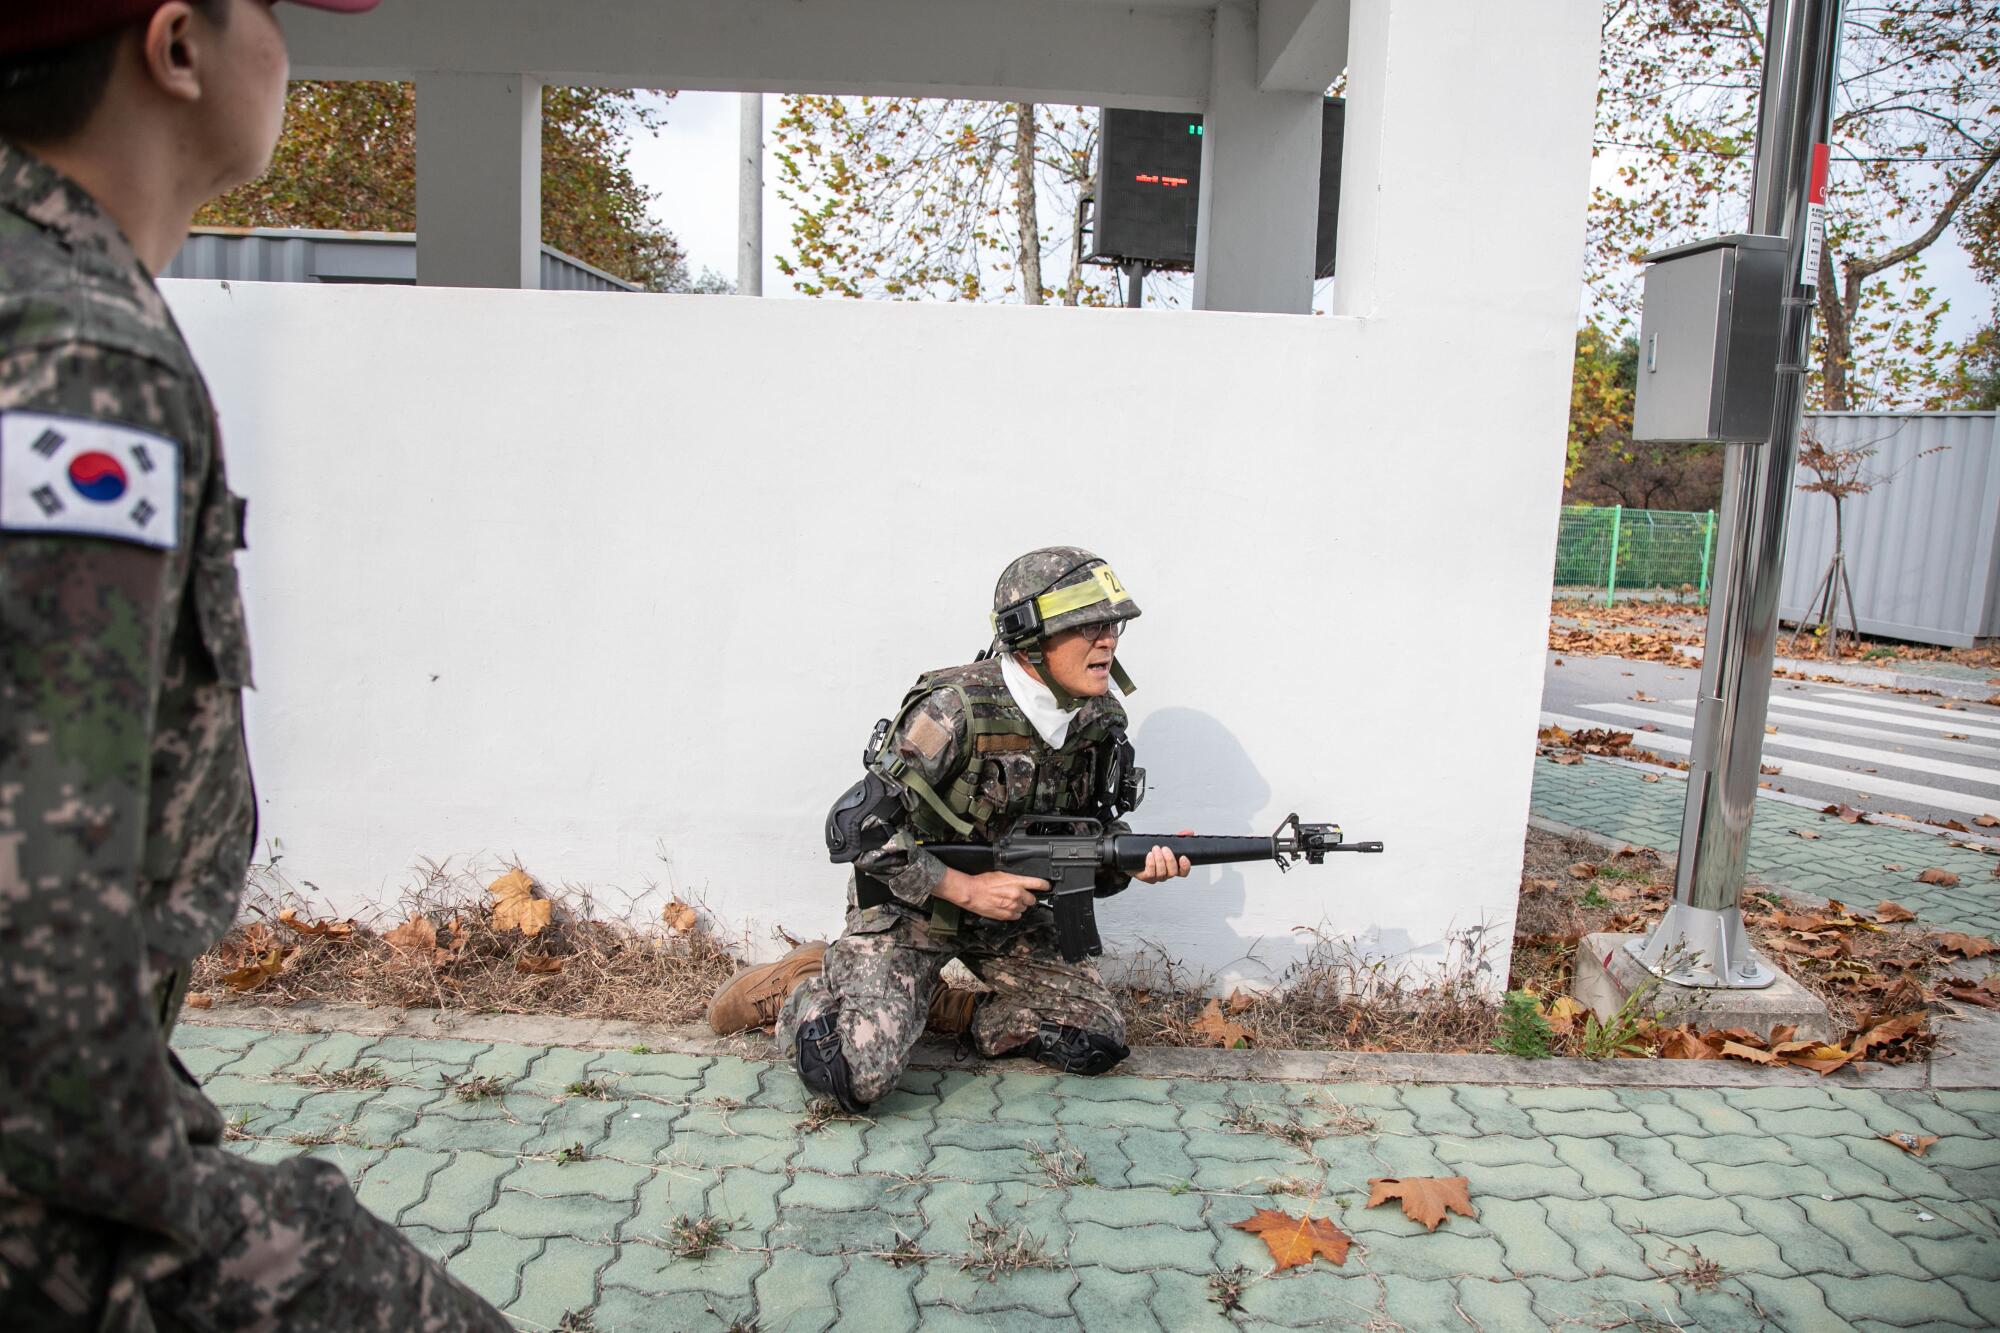 A member of the Senior Army participates in a mock urban warfare during military training at the